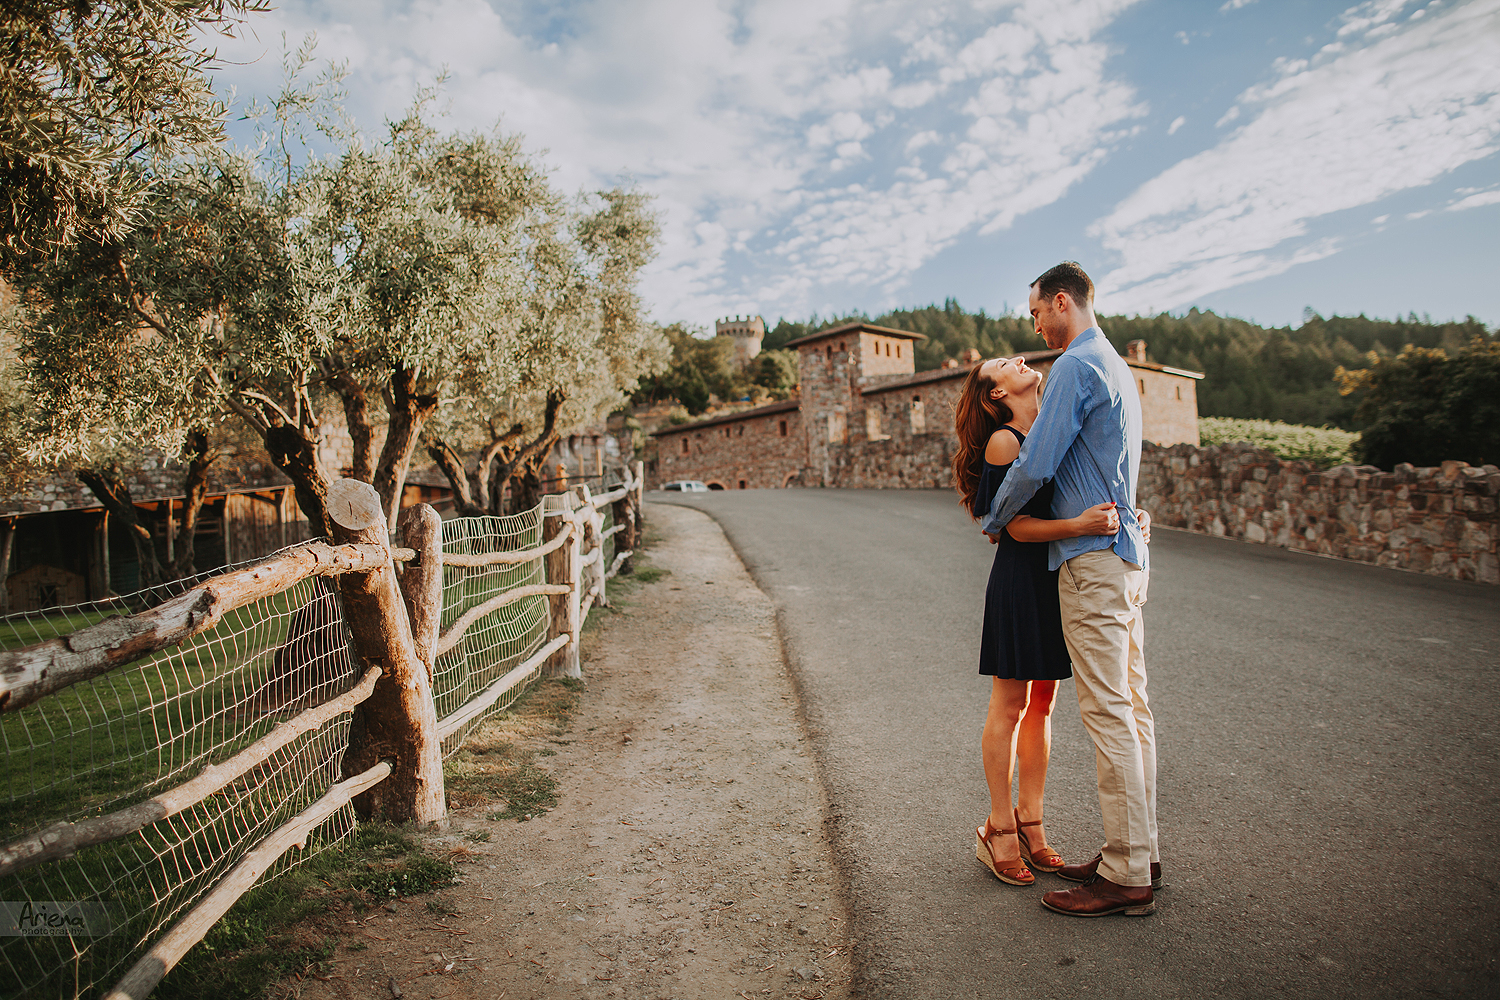 Napa Valley engagement session in Castello Di Amorosa at sunset time